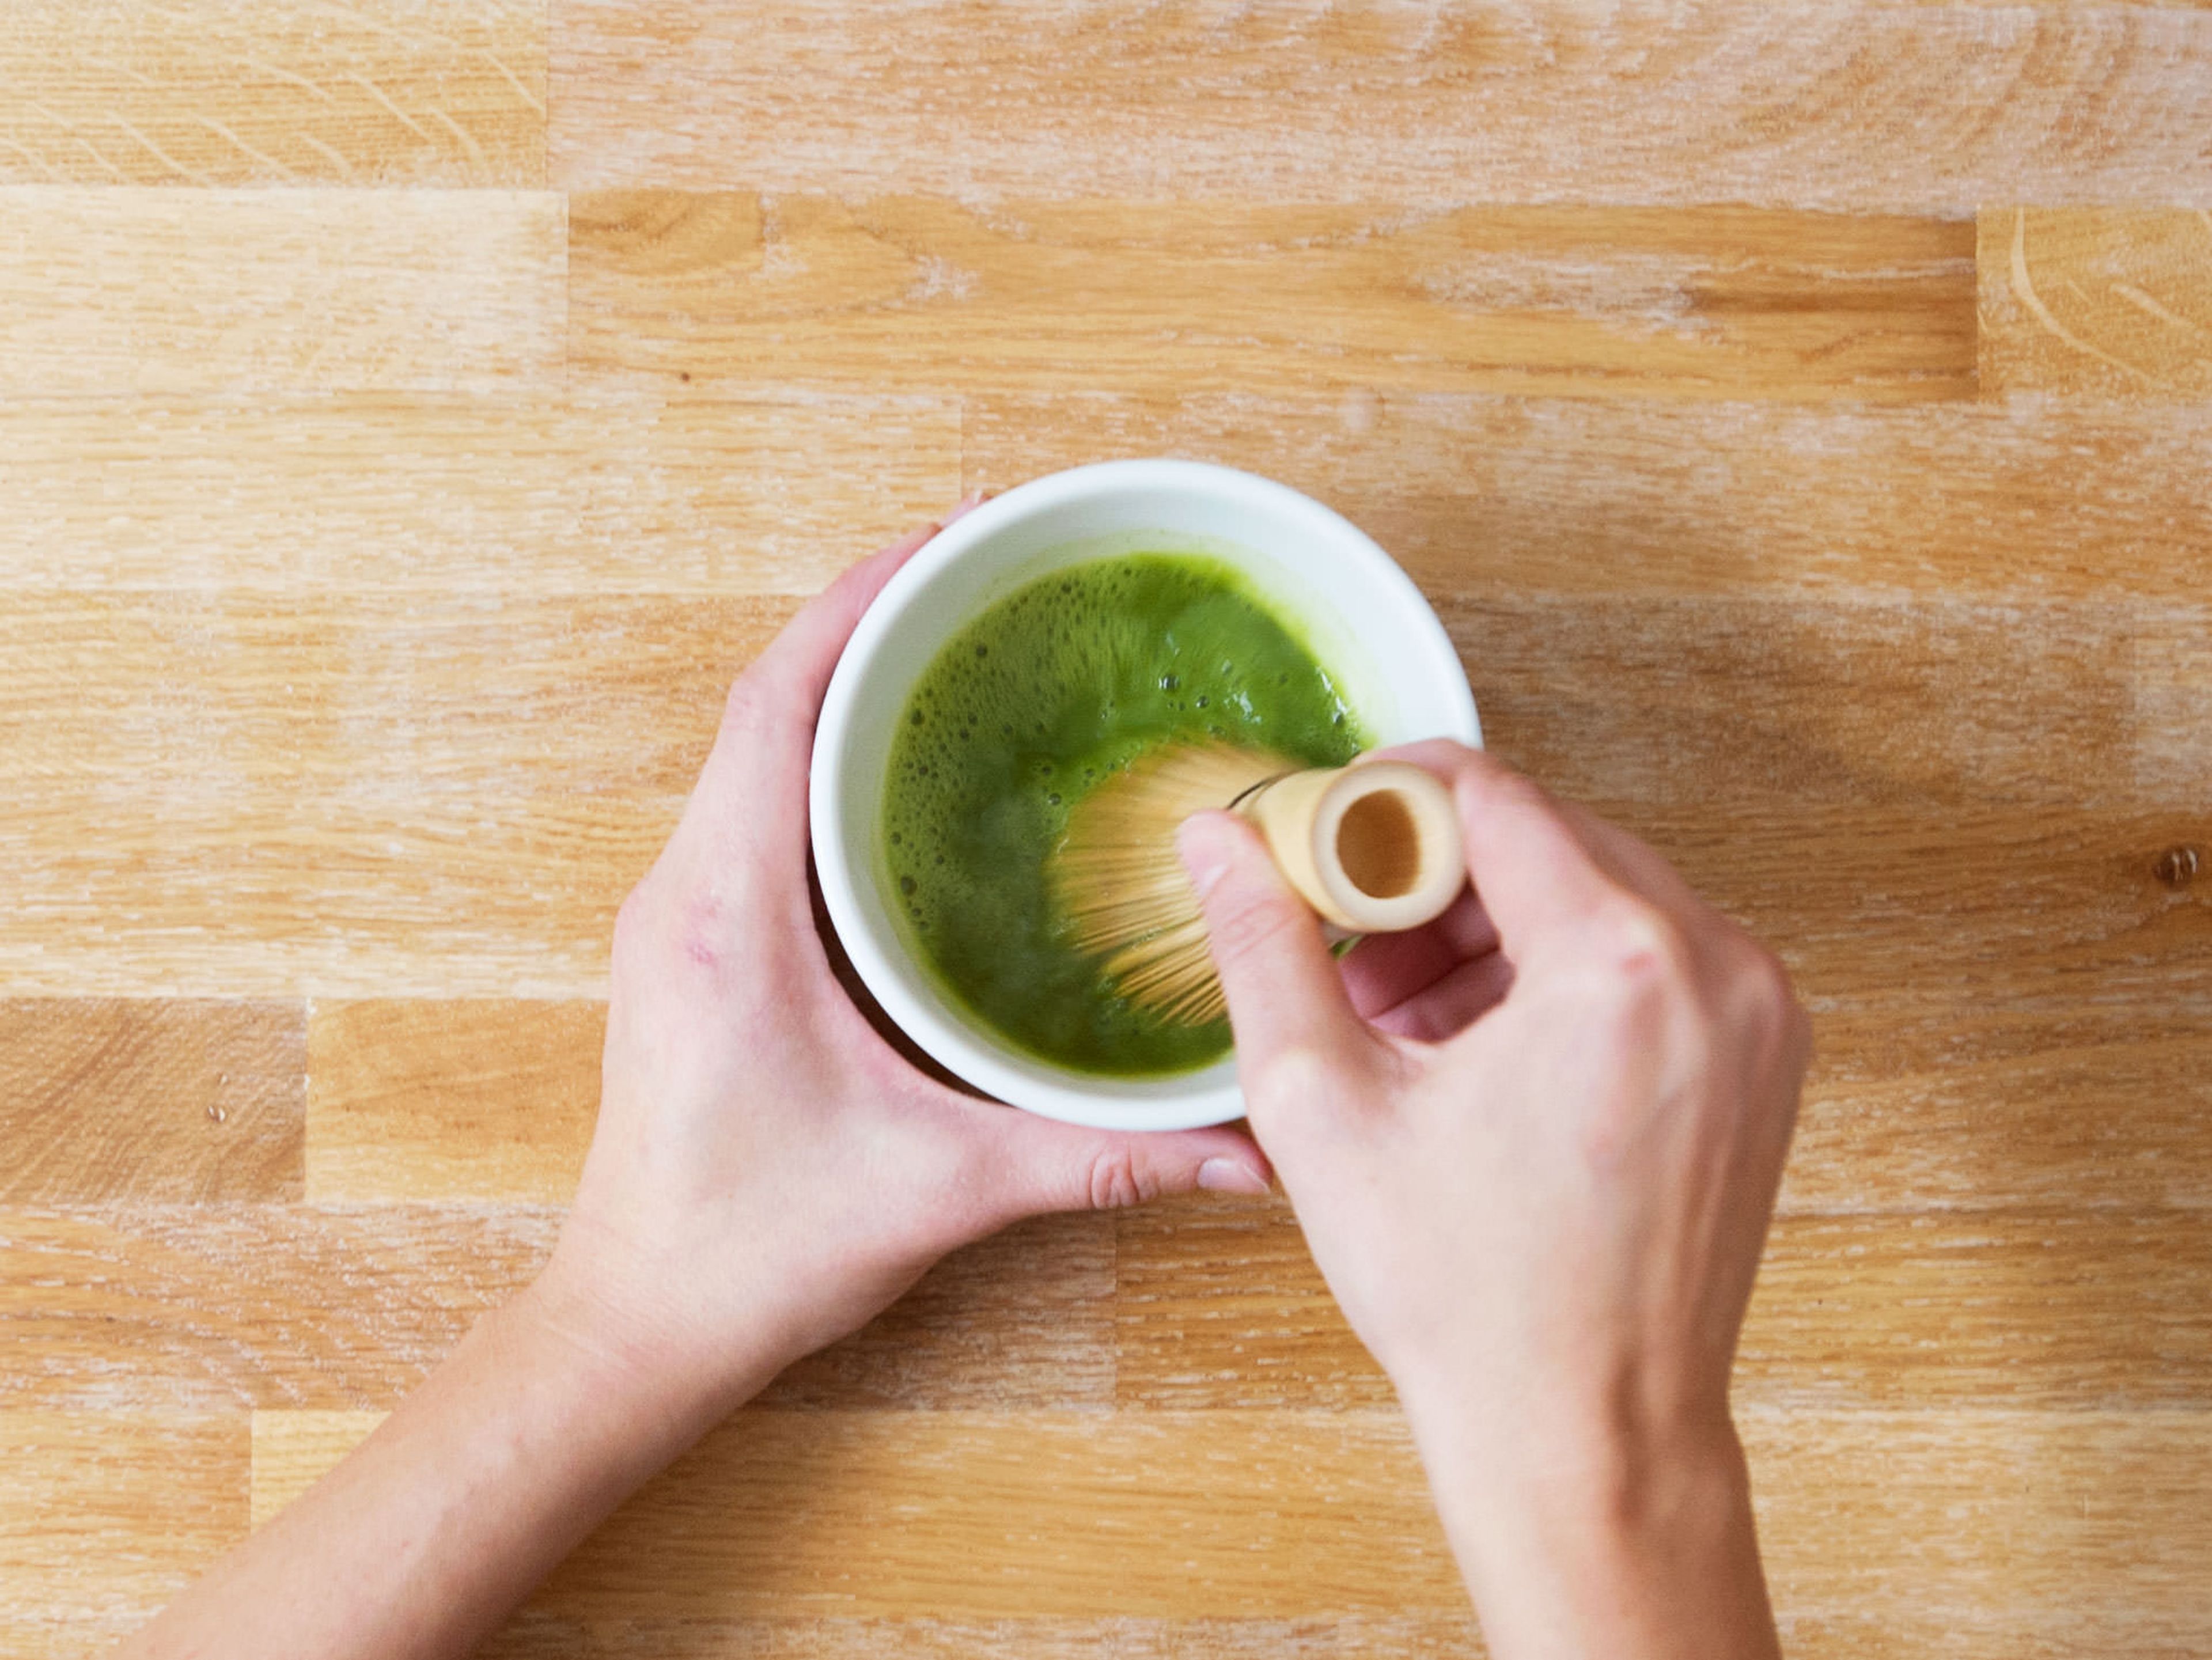 Boil water and let cool down for approx. 5 min. In a small bowl, add matcha and 2 tbsp of hot water. Carefully stir with the help pf a matcha whisk until paste-like. Add remaining water and whisk without pressure for approx. 30 – 60 sec.